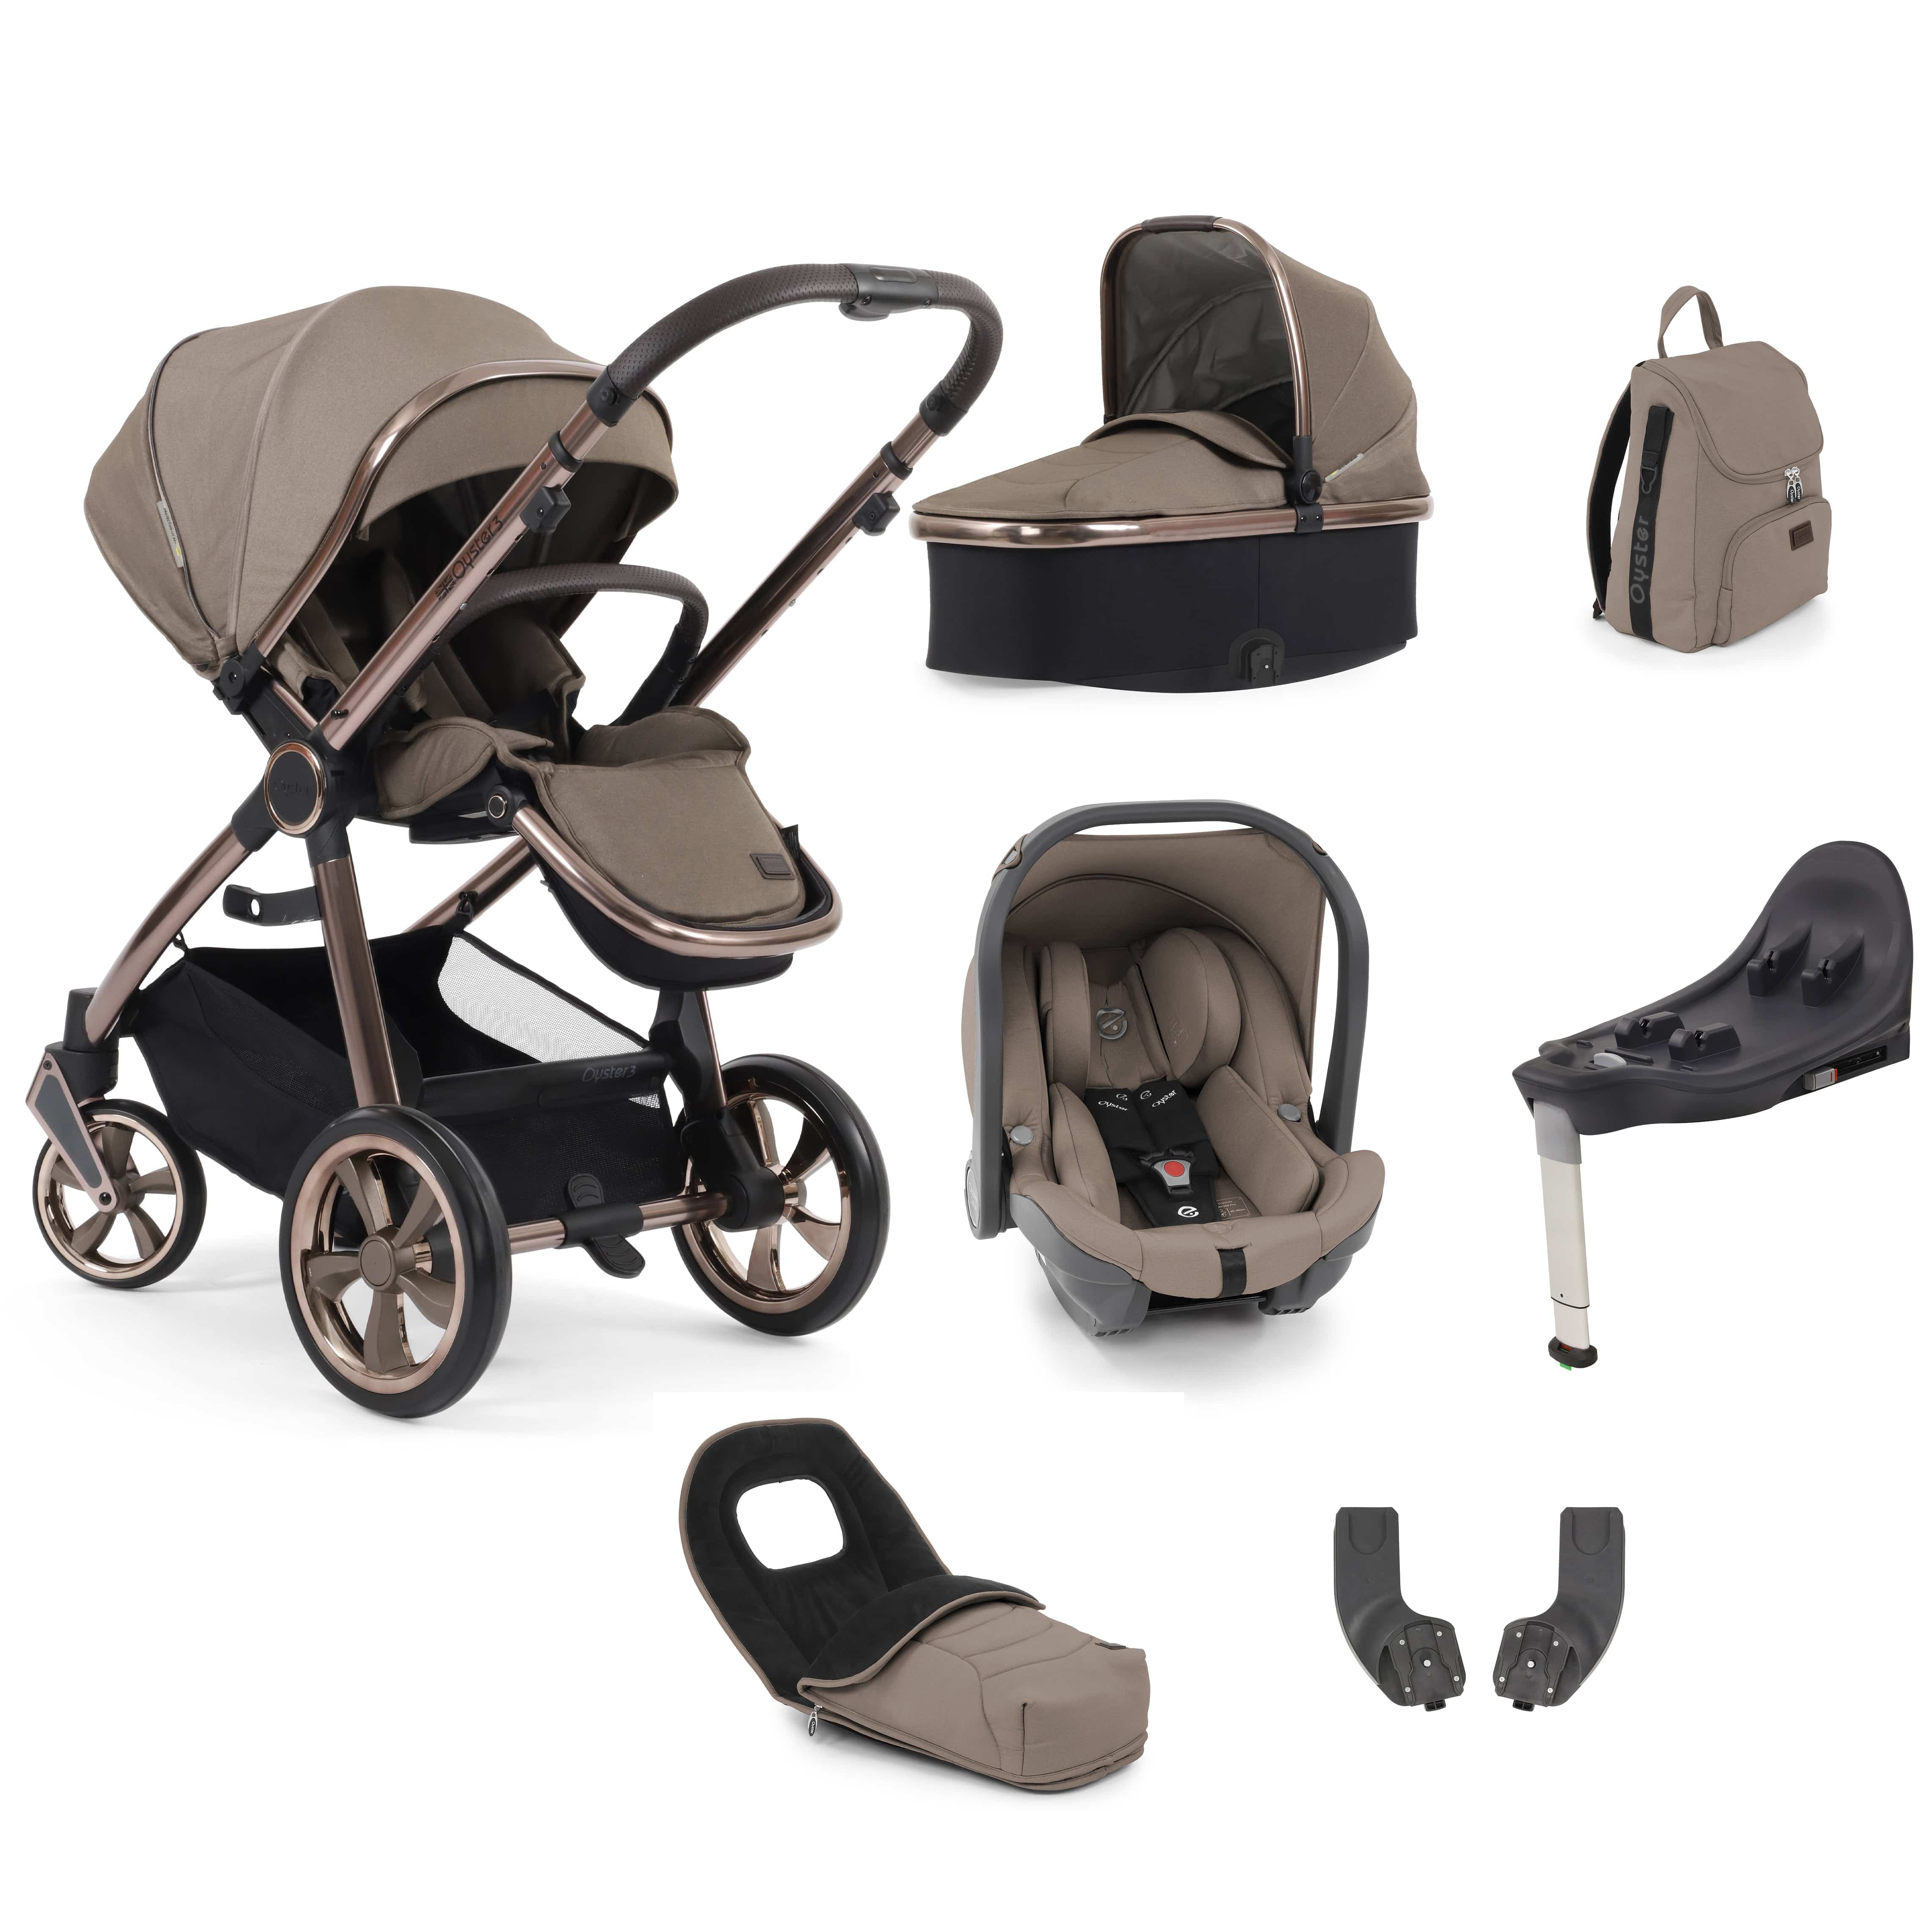 BabyStyle travel systems Babystyle Oyster 3 Luxury 7 Piece with Car Seat Bundle in Mink 14773-MNK